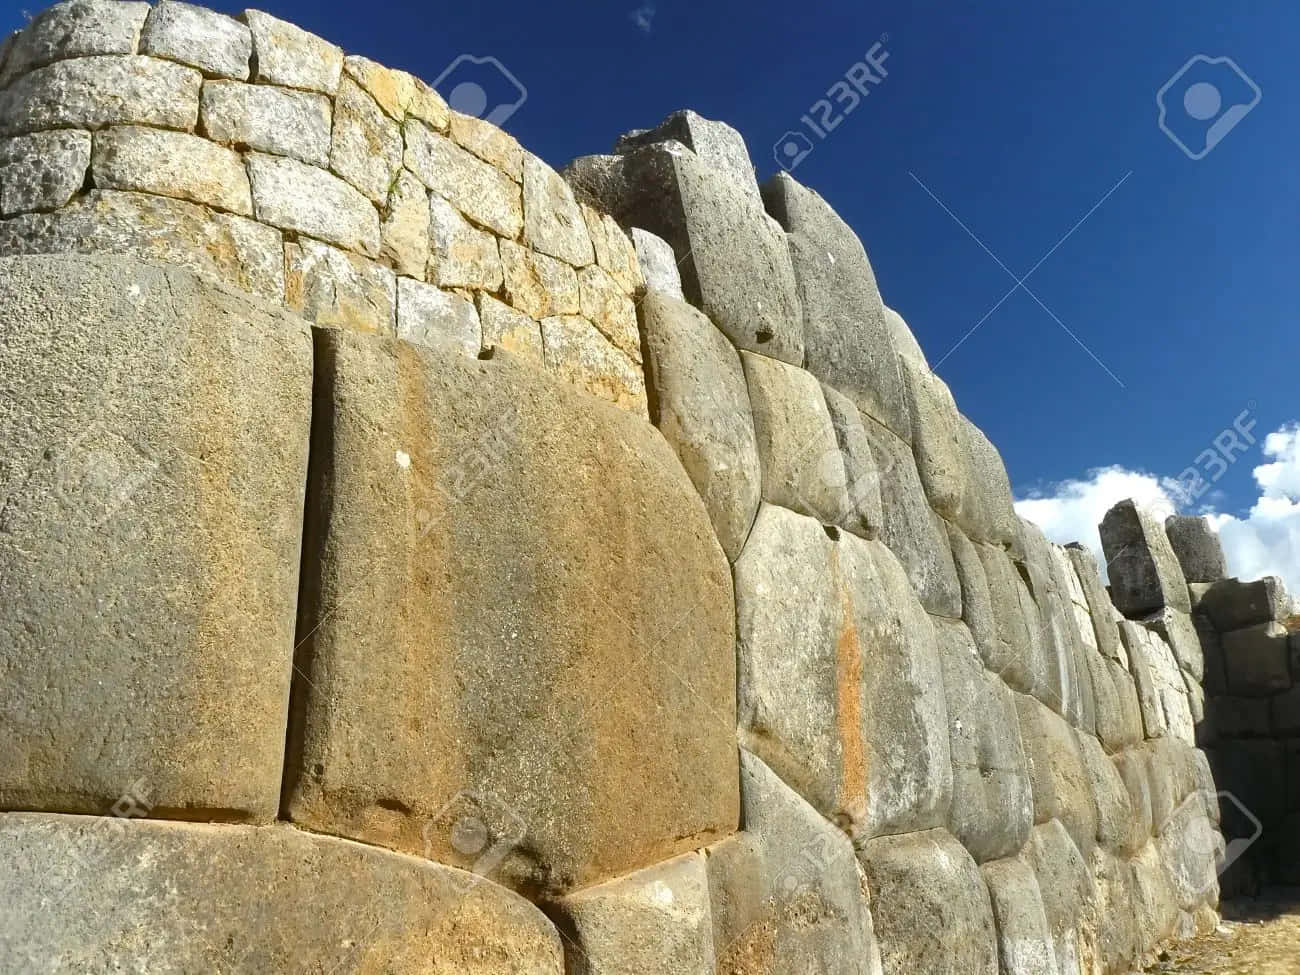 Mesmerizing View Of Sacsayhuaman, The Inca Military Fortress In Cusco, Peru Wallpaper